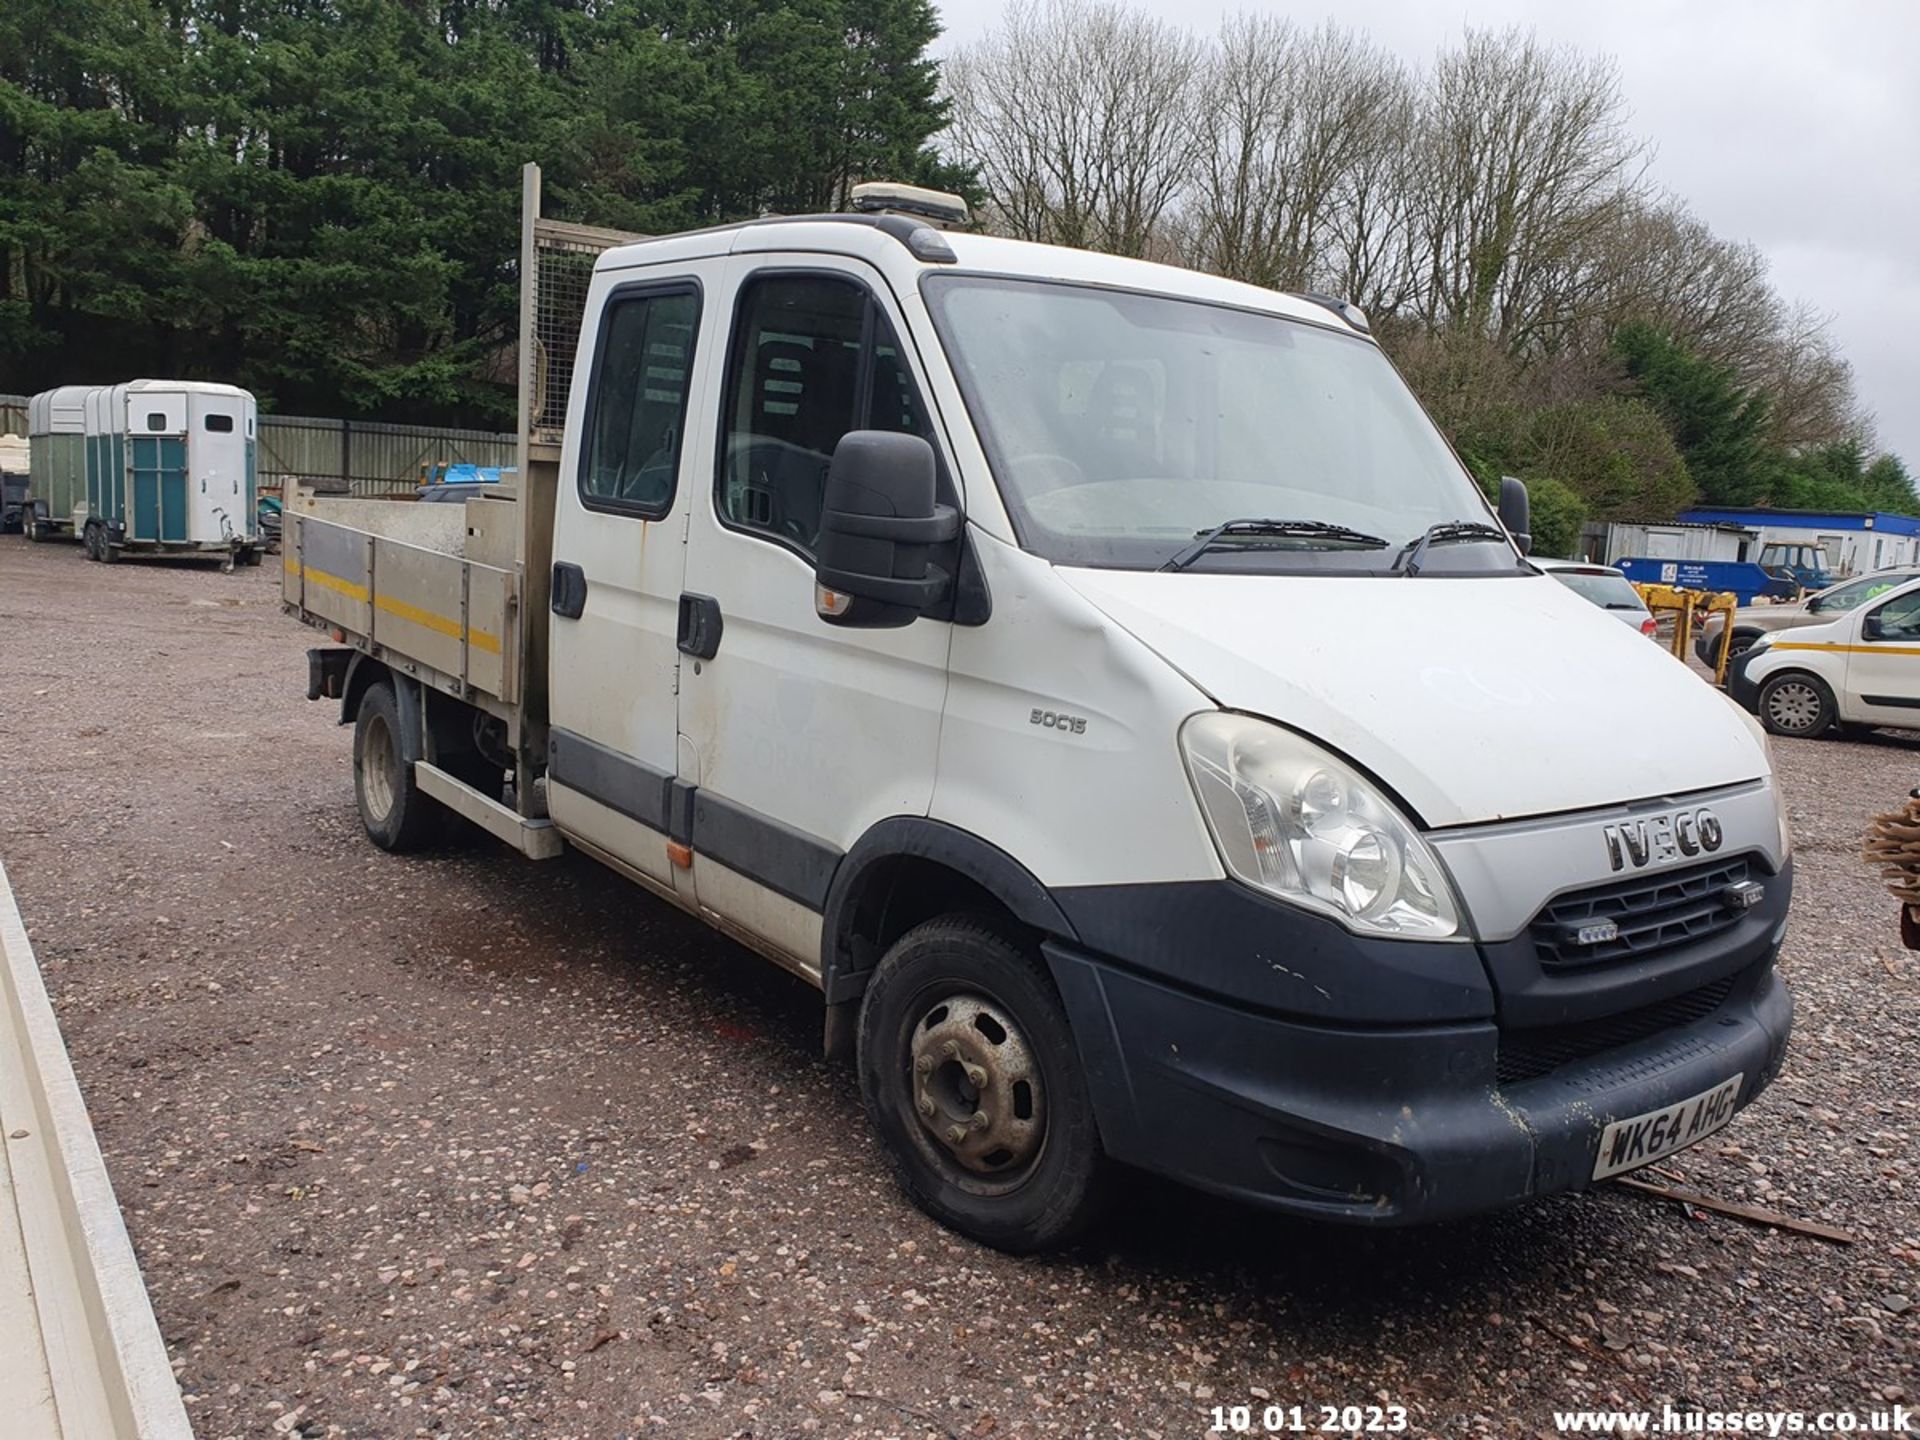 14/64 IVECO DAILY 50C15 - 2998cc 4dr Tipper (White, 108k) - Image 4 of 26